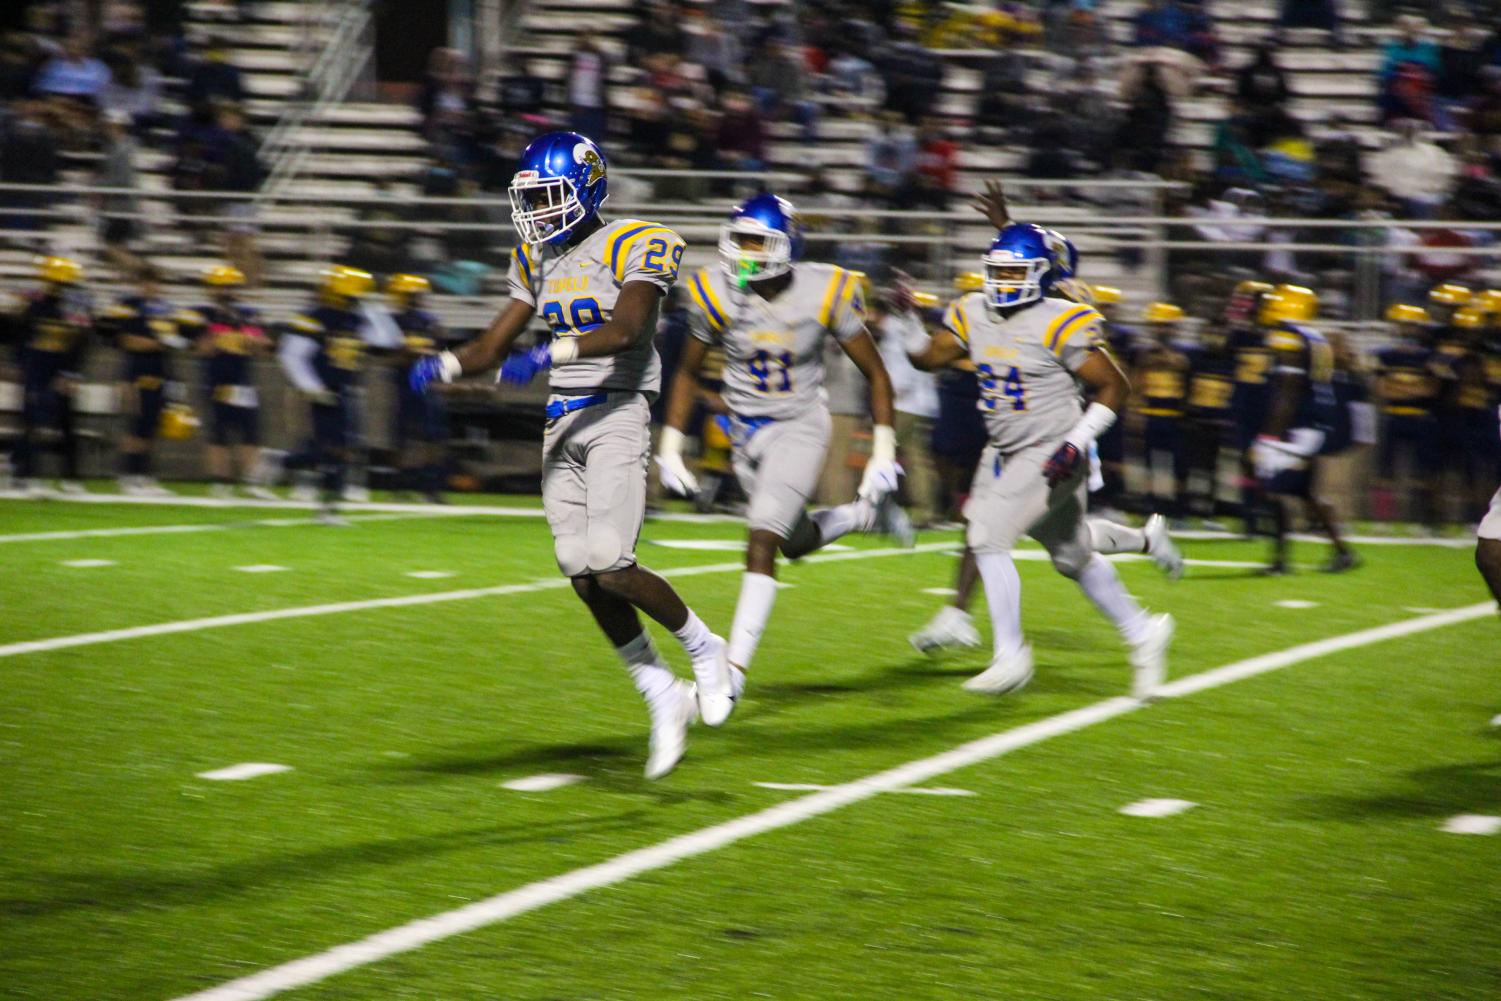 Tupelo+Varsity+Football+improves+to+2-1+with+a+win+over+Olive+Branch.